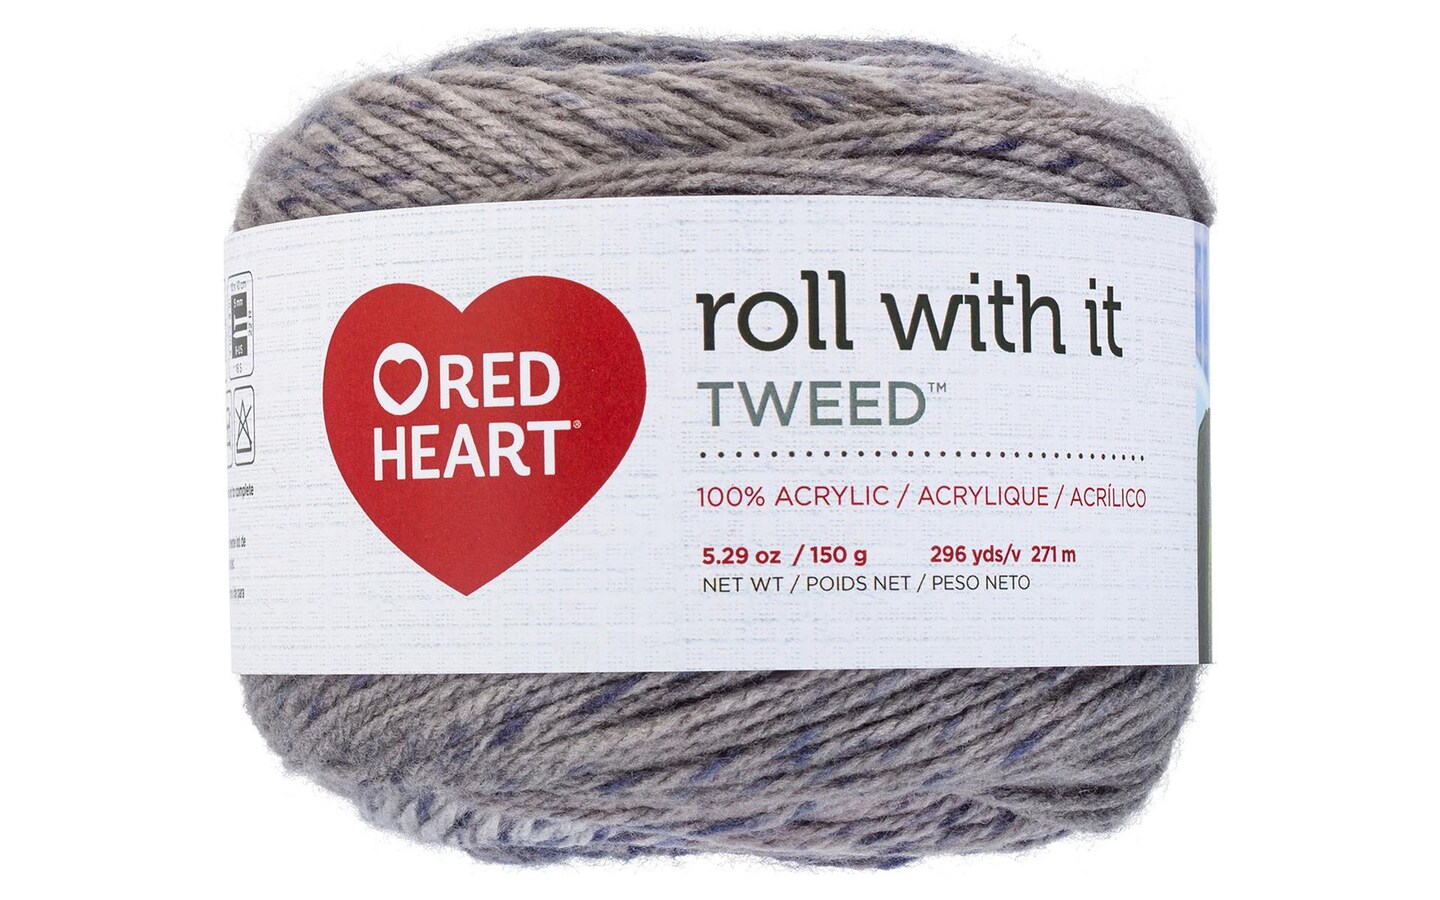 Red Heart Yarn Roll With It Tweed Multi-Color Yarn 5.29 oz E888 – Good's  Store Online